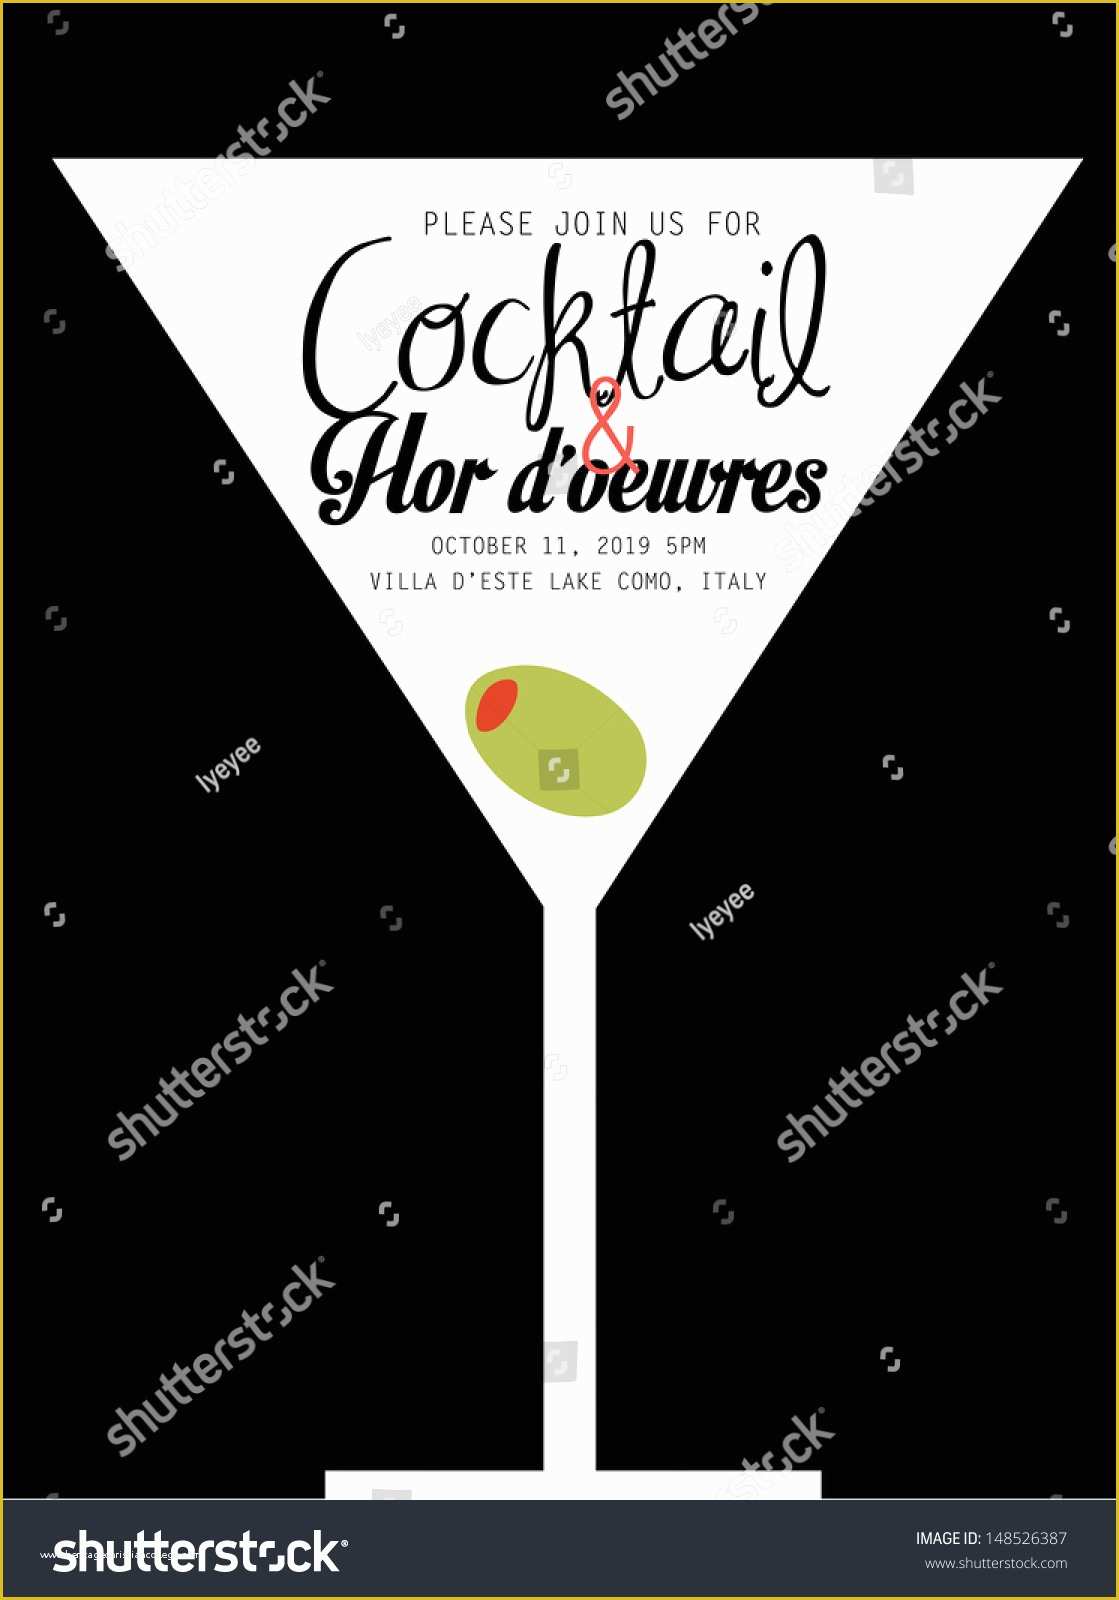 Free Christmas Cocktail Party Invitation Templates Of Cocktail Party Invitation Template Vectorillustration